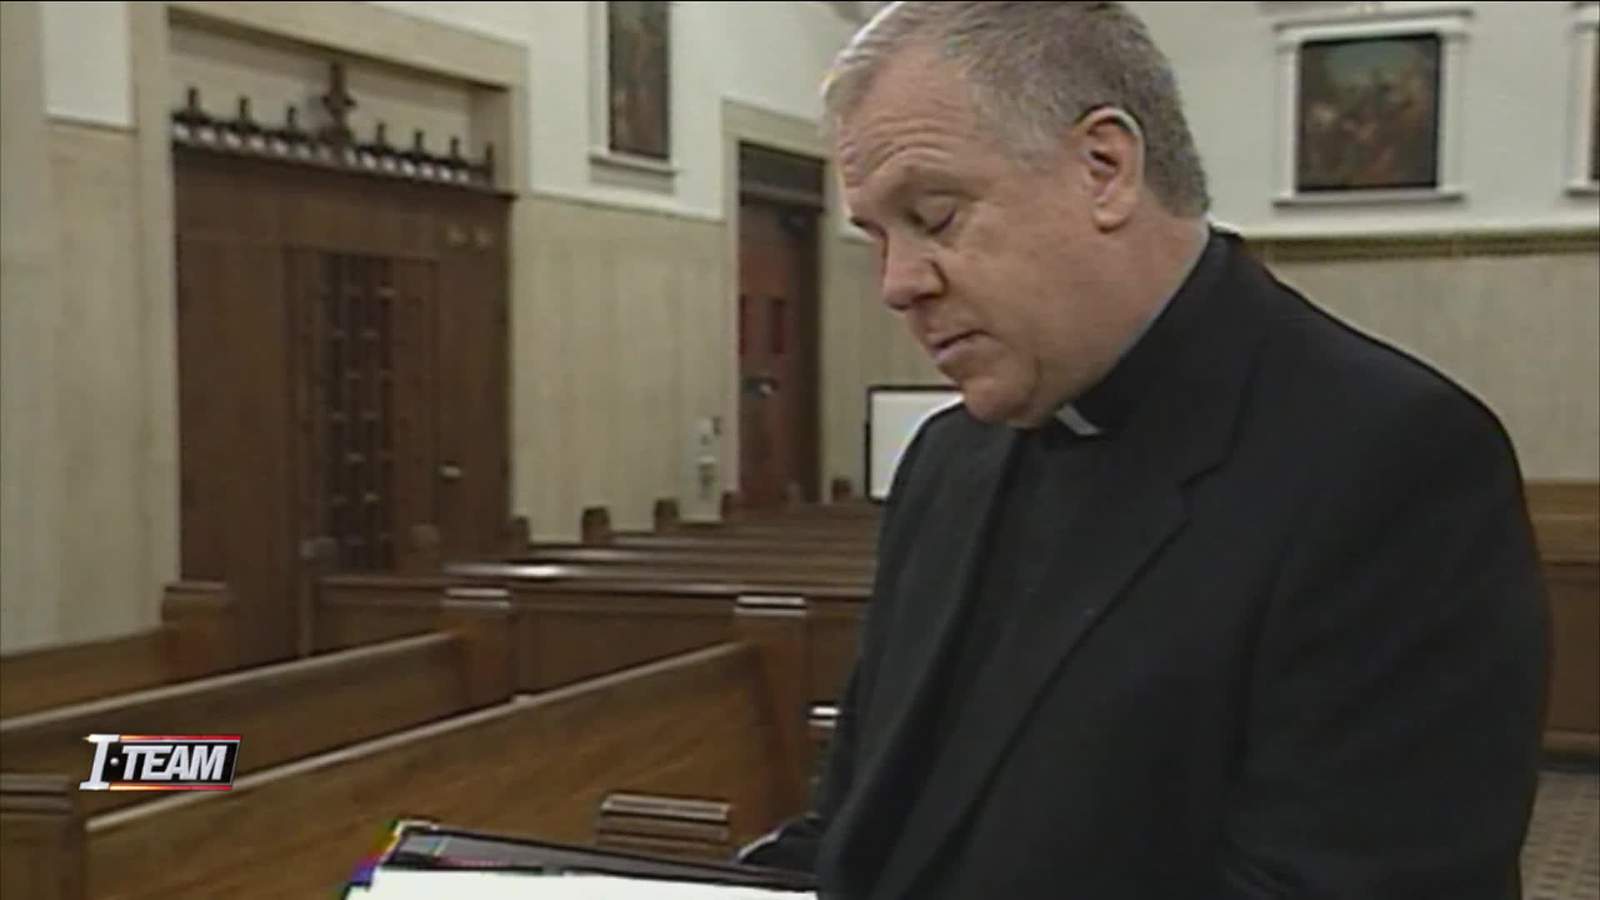 Diocese of Saint Augustine says retired priest under investigation